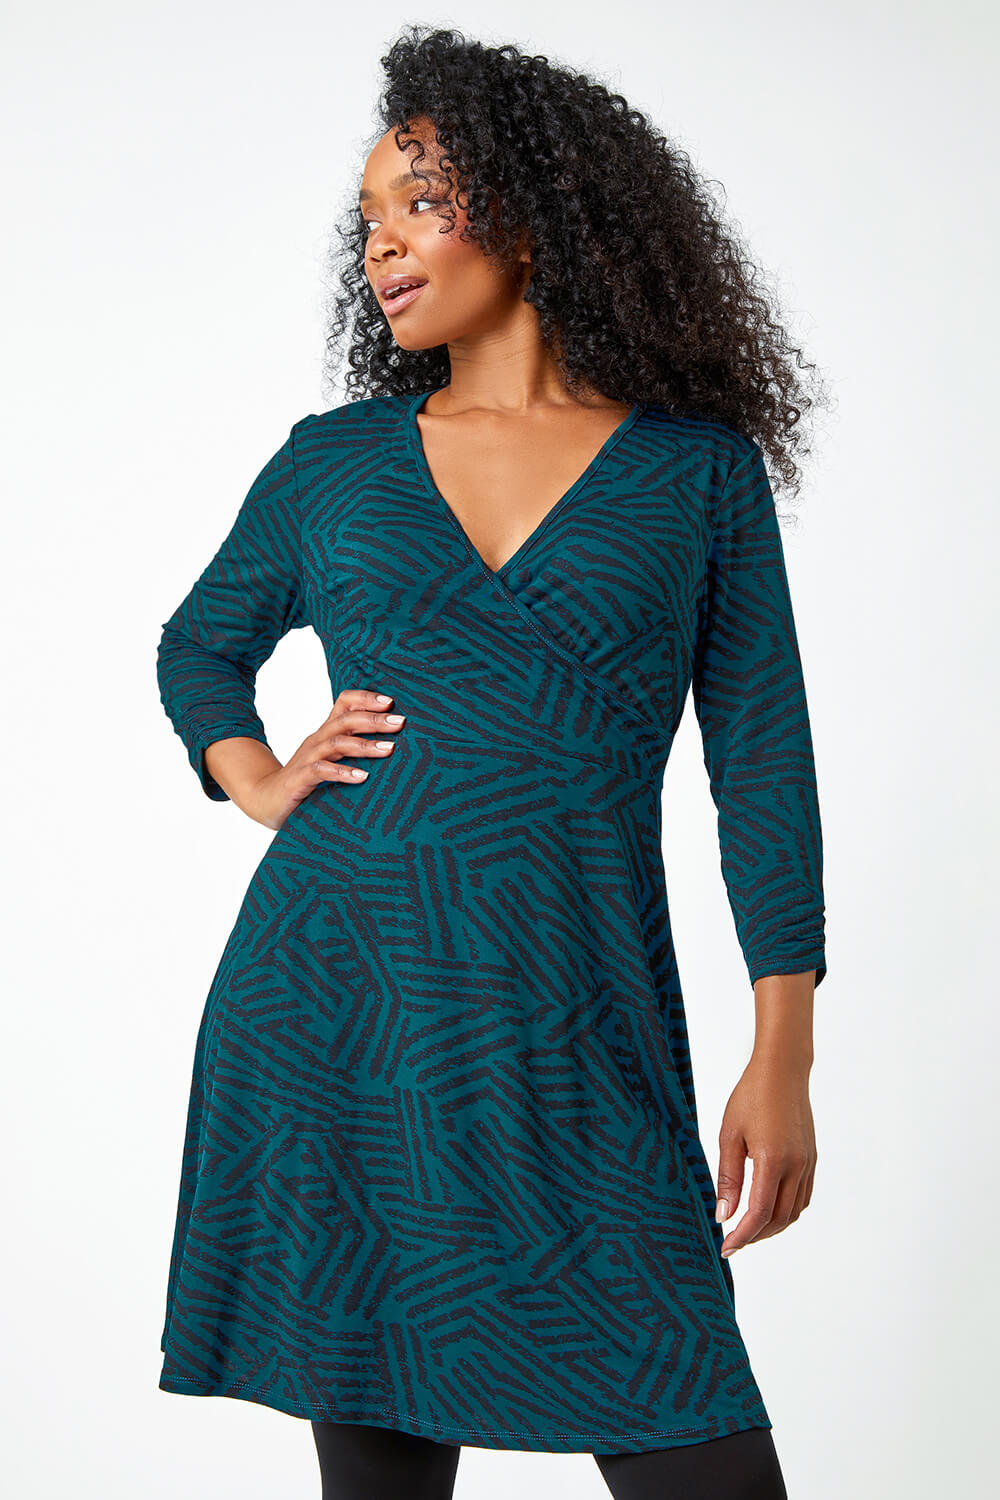 Teal Petite Mock Wrap Abstract Stretch Dress, Image 2 of 5